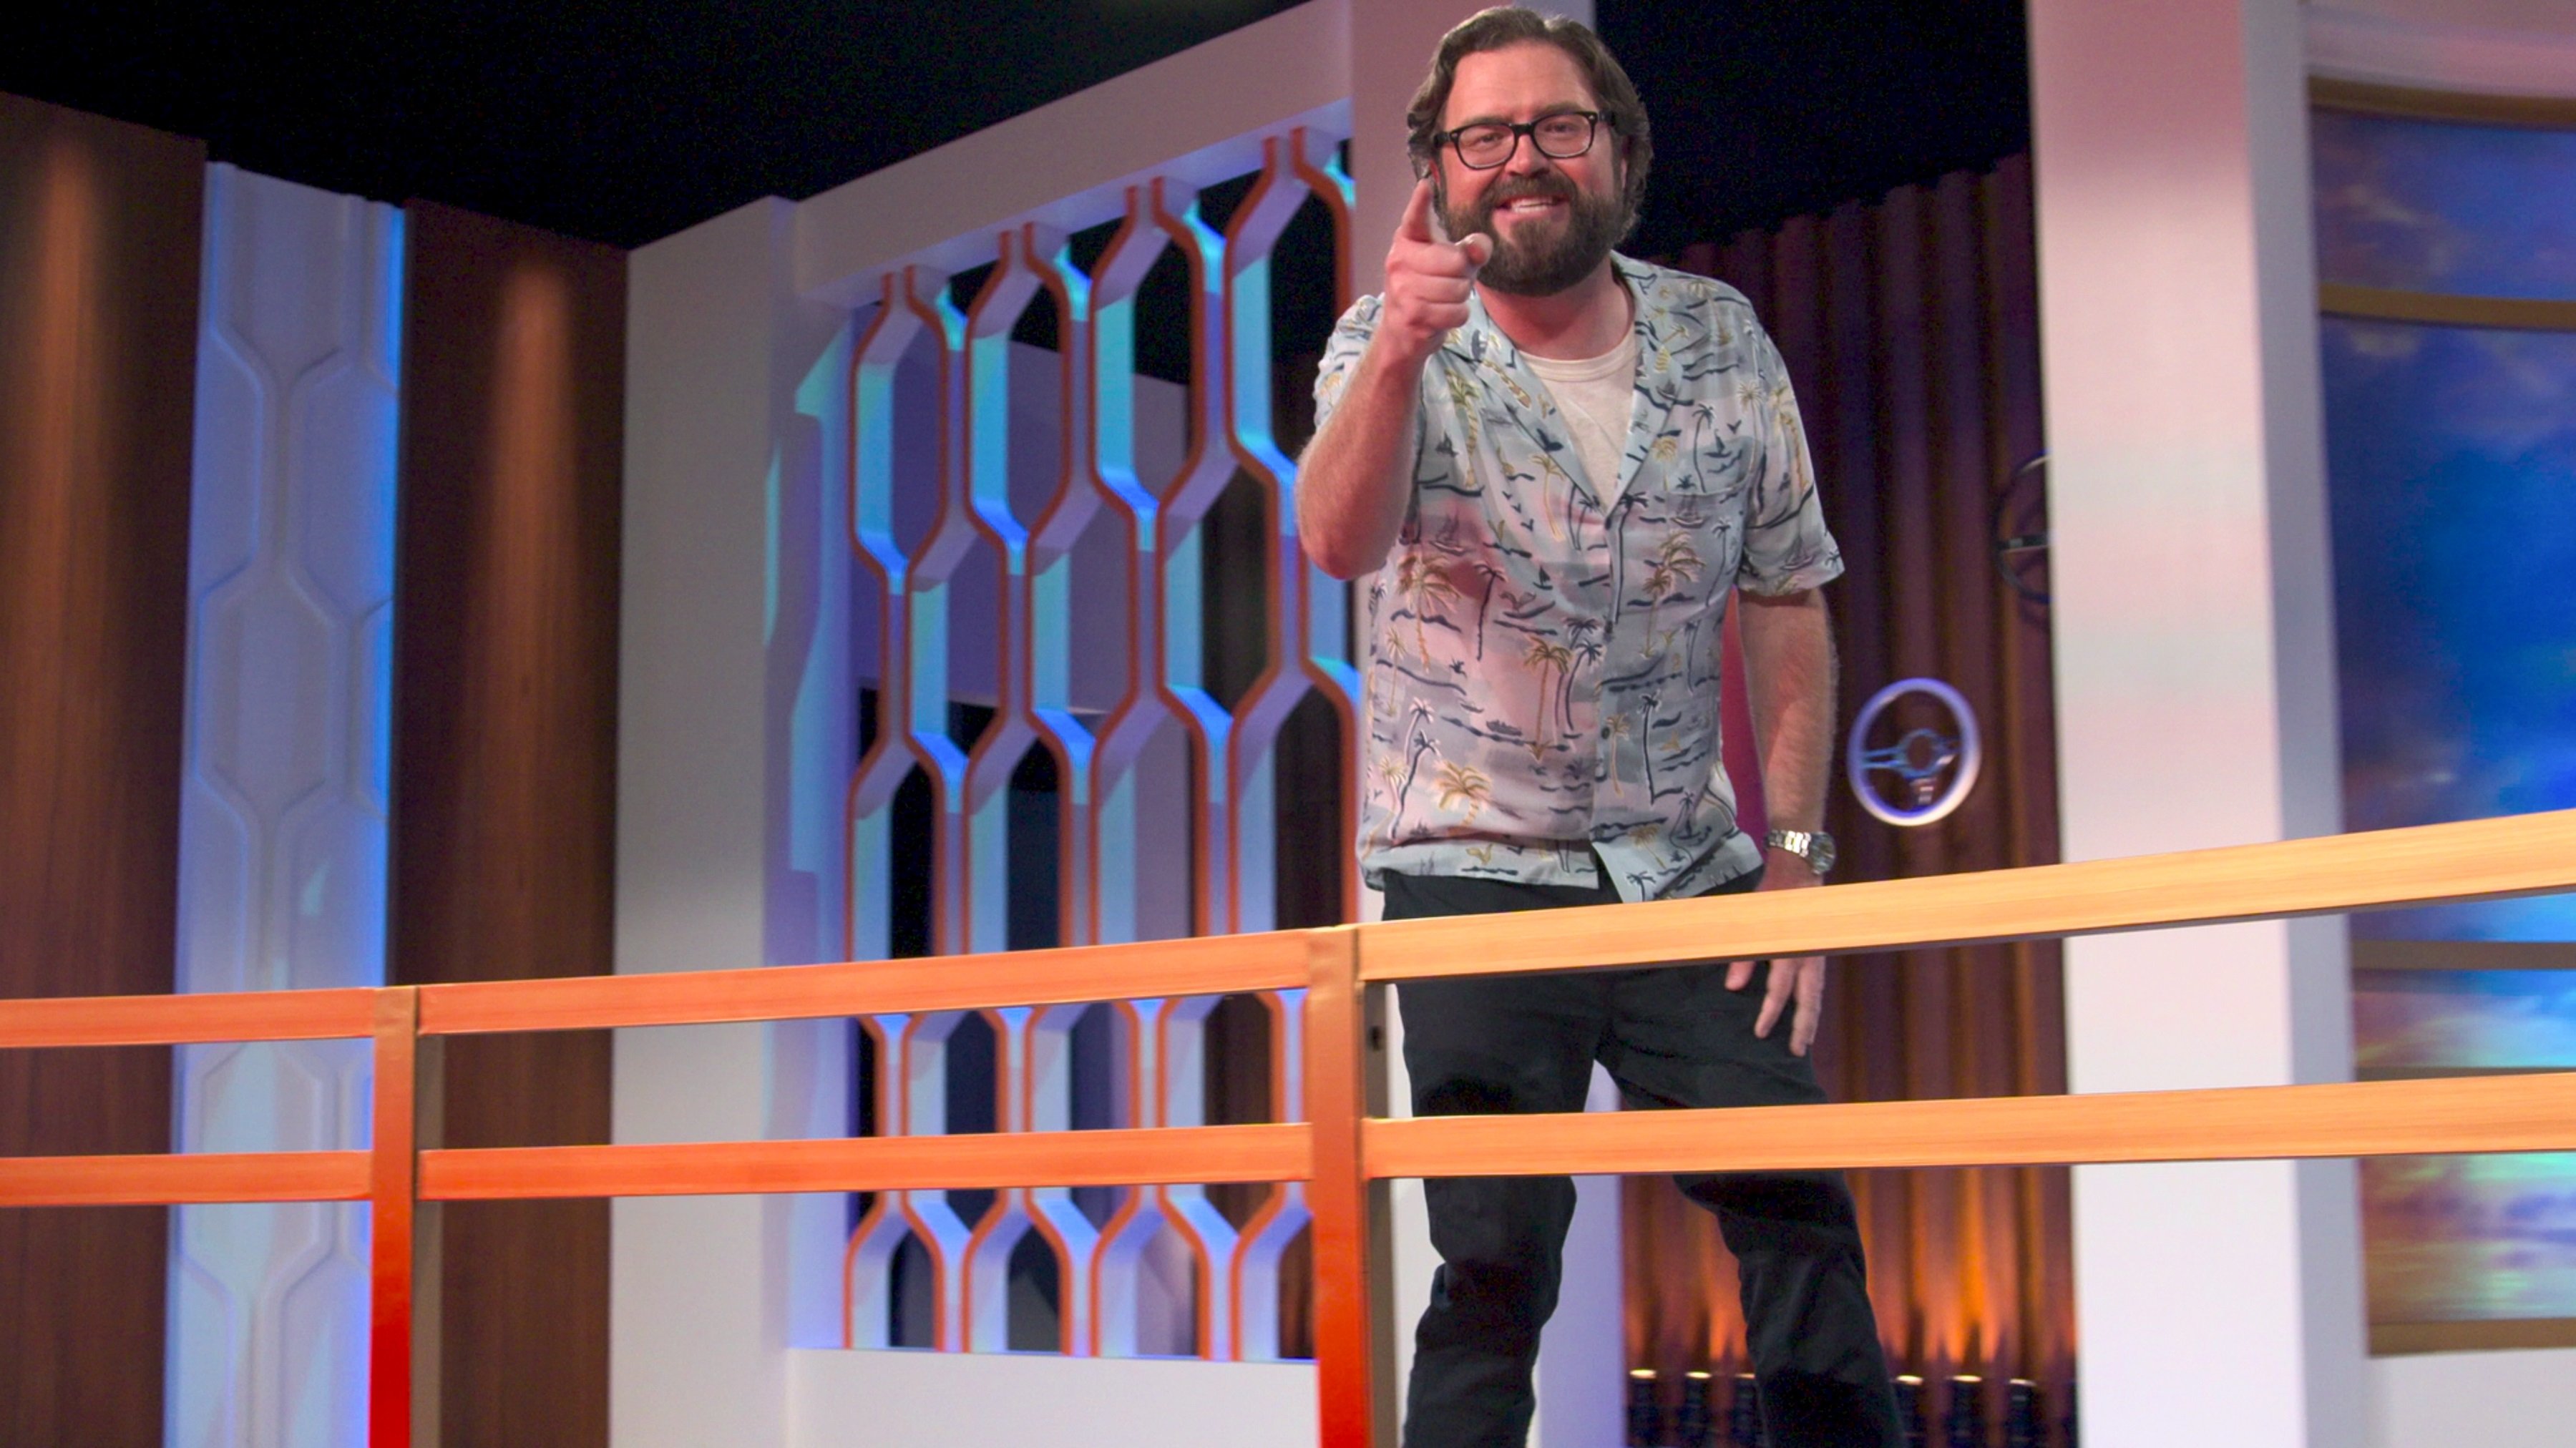 'Floor Is Lava' host Rutledge Wood pointing at the camera